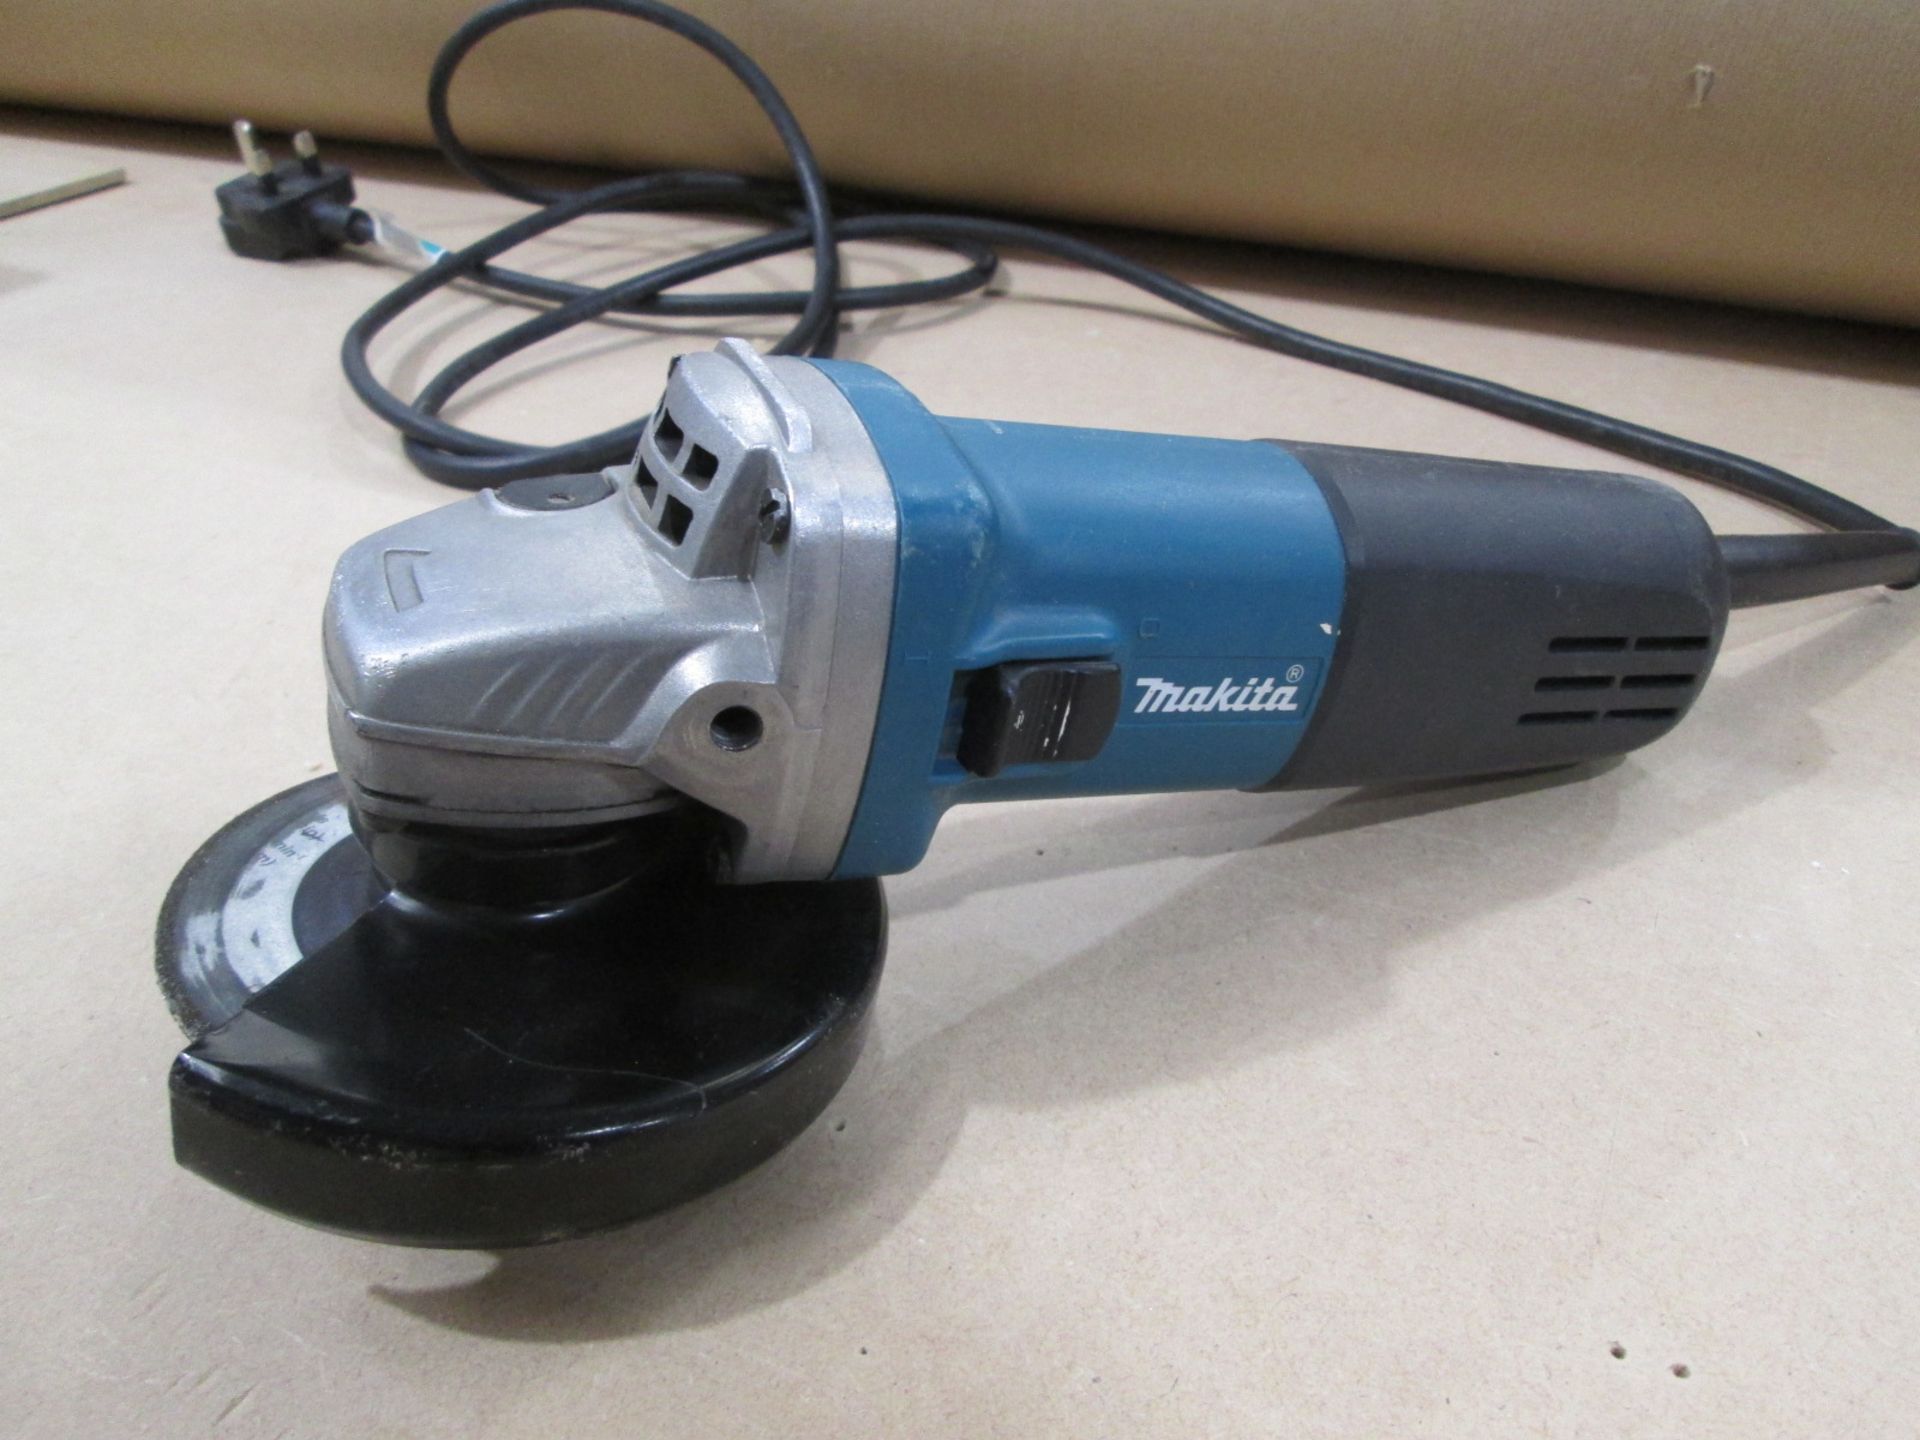 Makita 9554NB 115mm Angle Grinder, 240V, In wooden box with various disc's